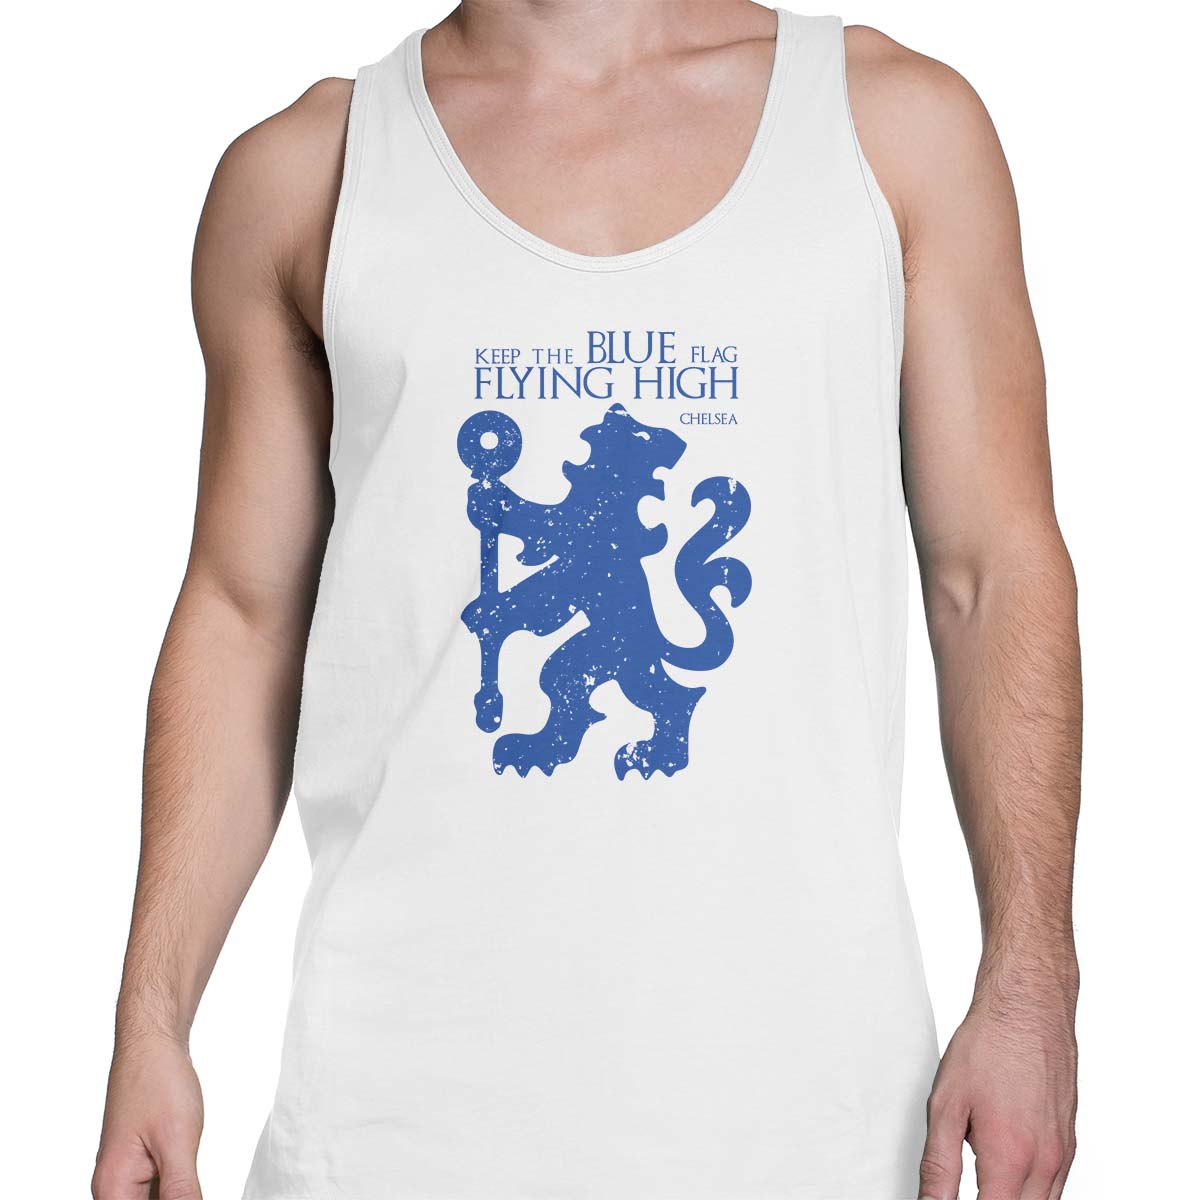 game of thrones house chelsea tee